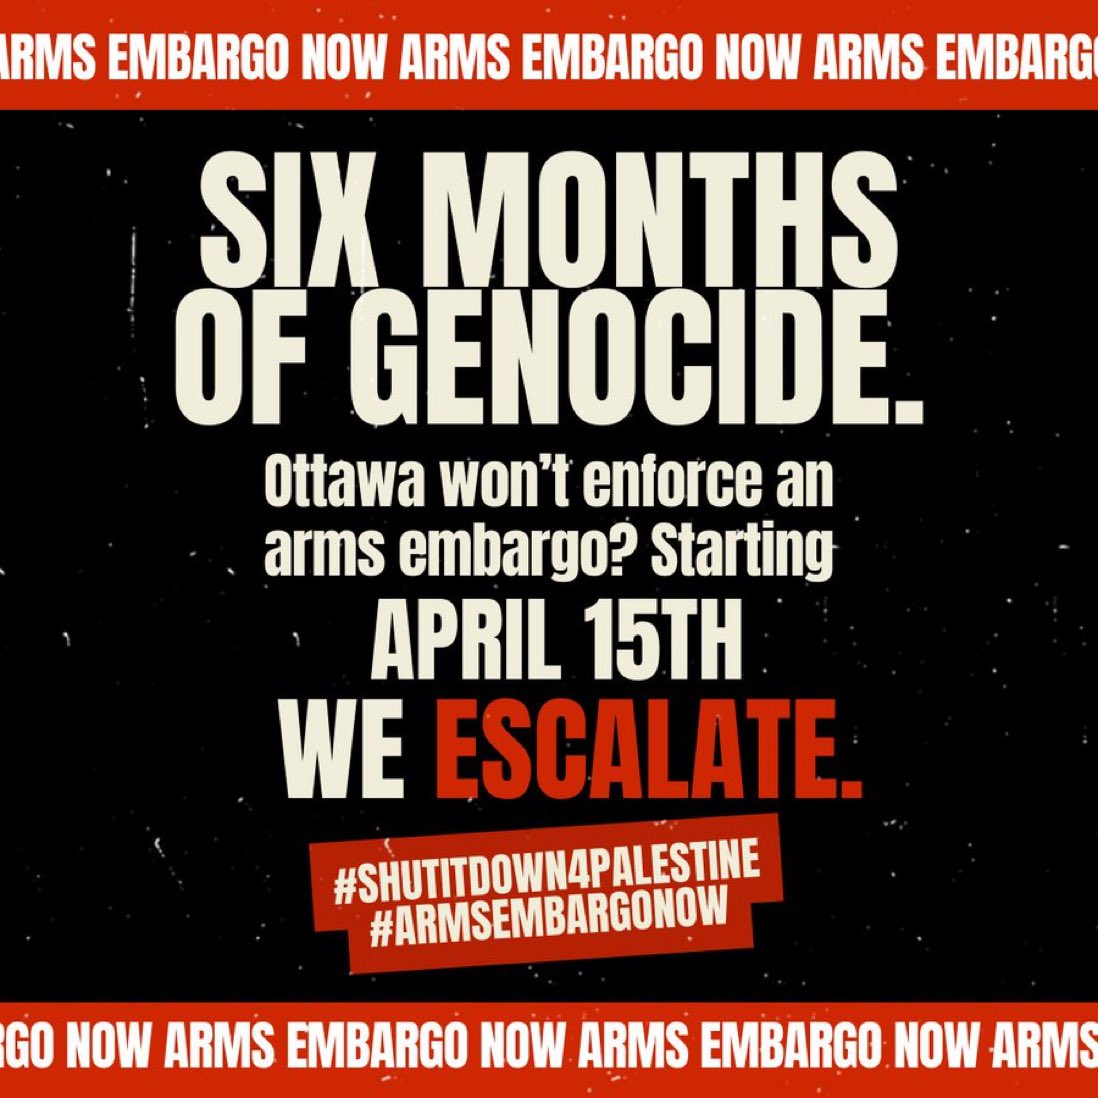 In 6 months a global movement against genocide has been born. We have not stopped the killing. Yet. But we have seen many movements come together, united in a visceral cry of anguish, anger and solidarity for Palestine. Now it’s time to escalate. #ArmsEmbargoNow